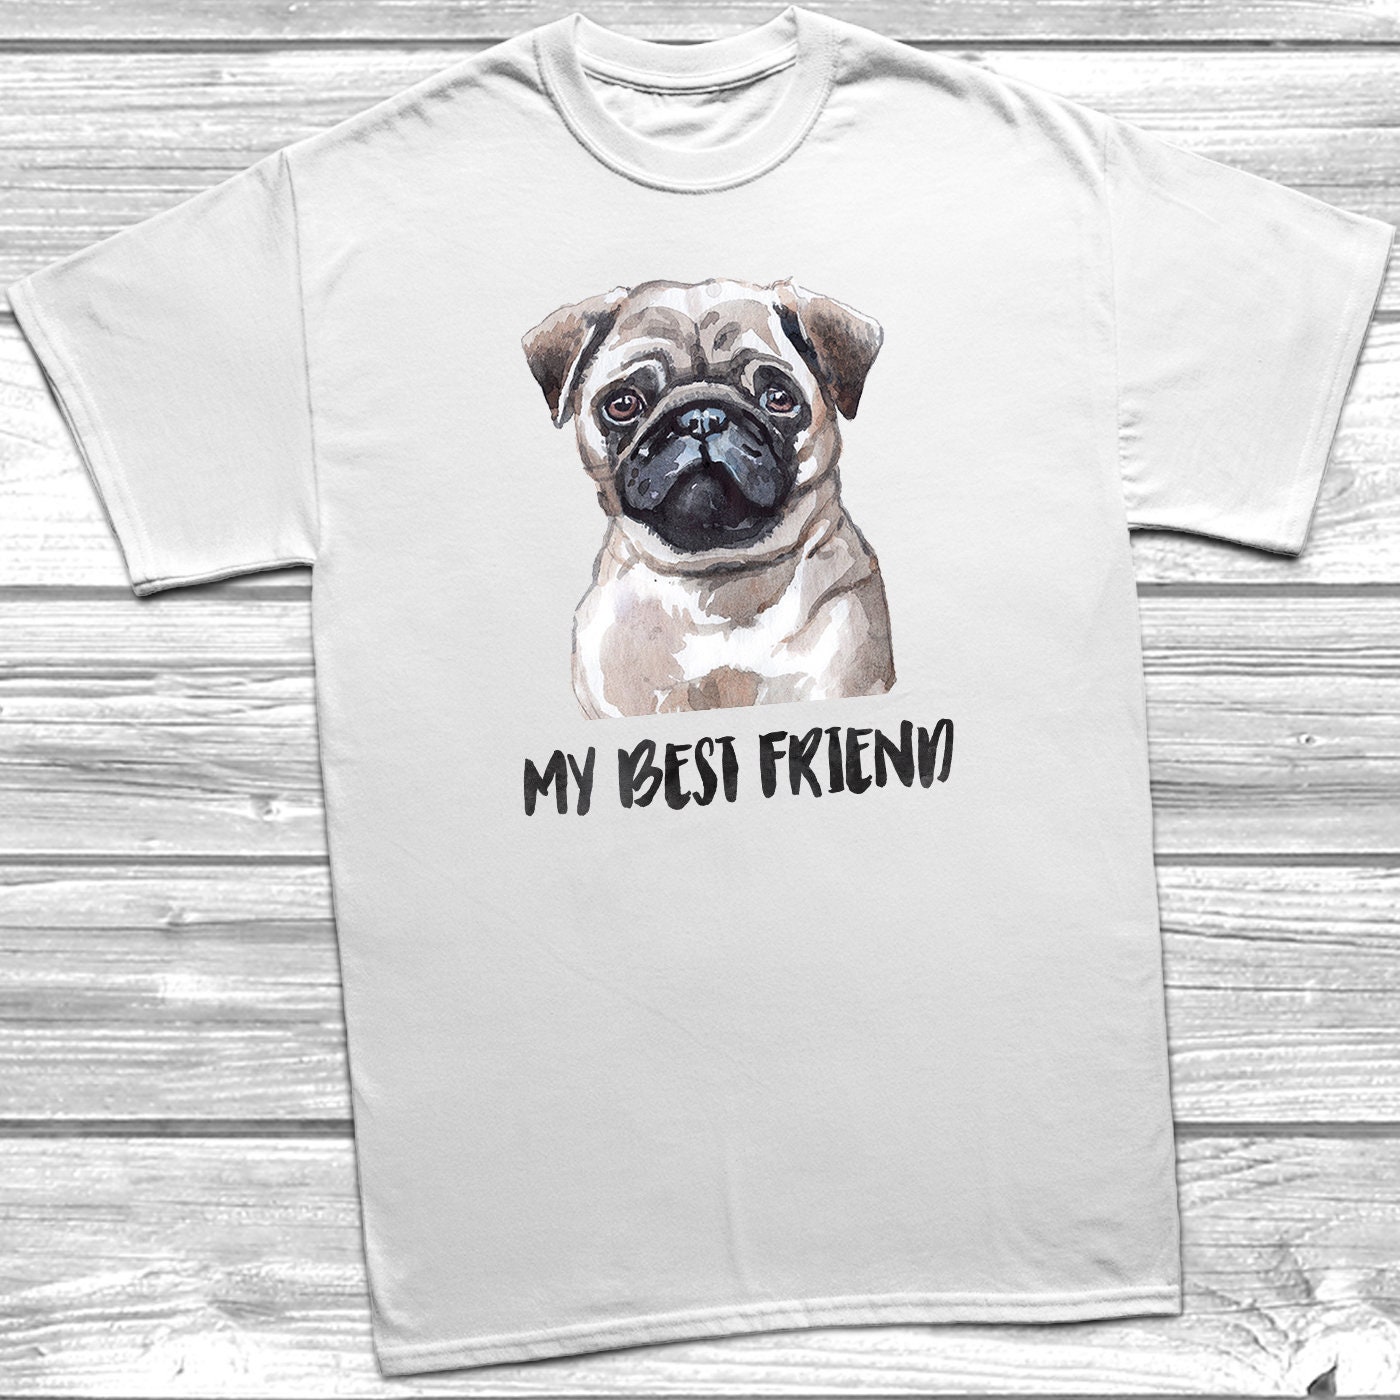 Pug Lovely Printed T-Shirts,Crew Neck T-Shirt of Girls,Polyester,Girl Holding He